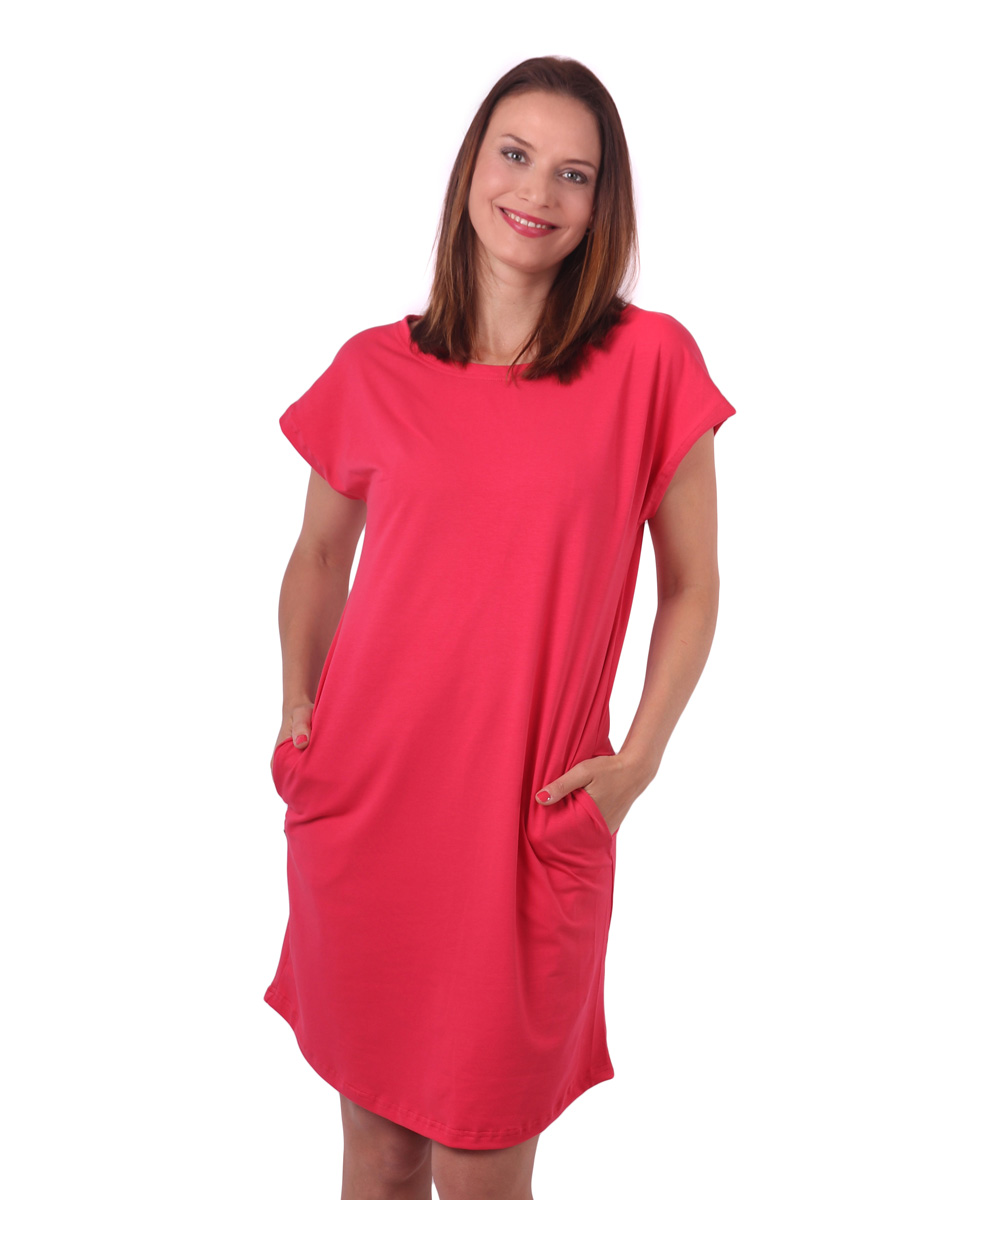 Women's dress with pockets Zoe, oversized loose fit, salmon pink